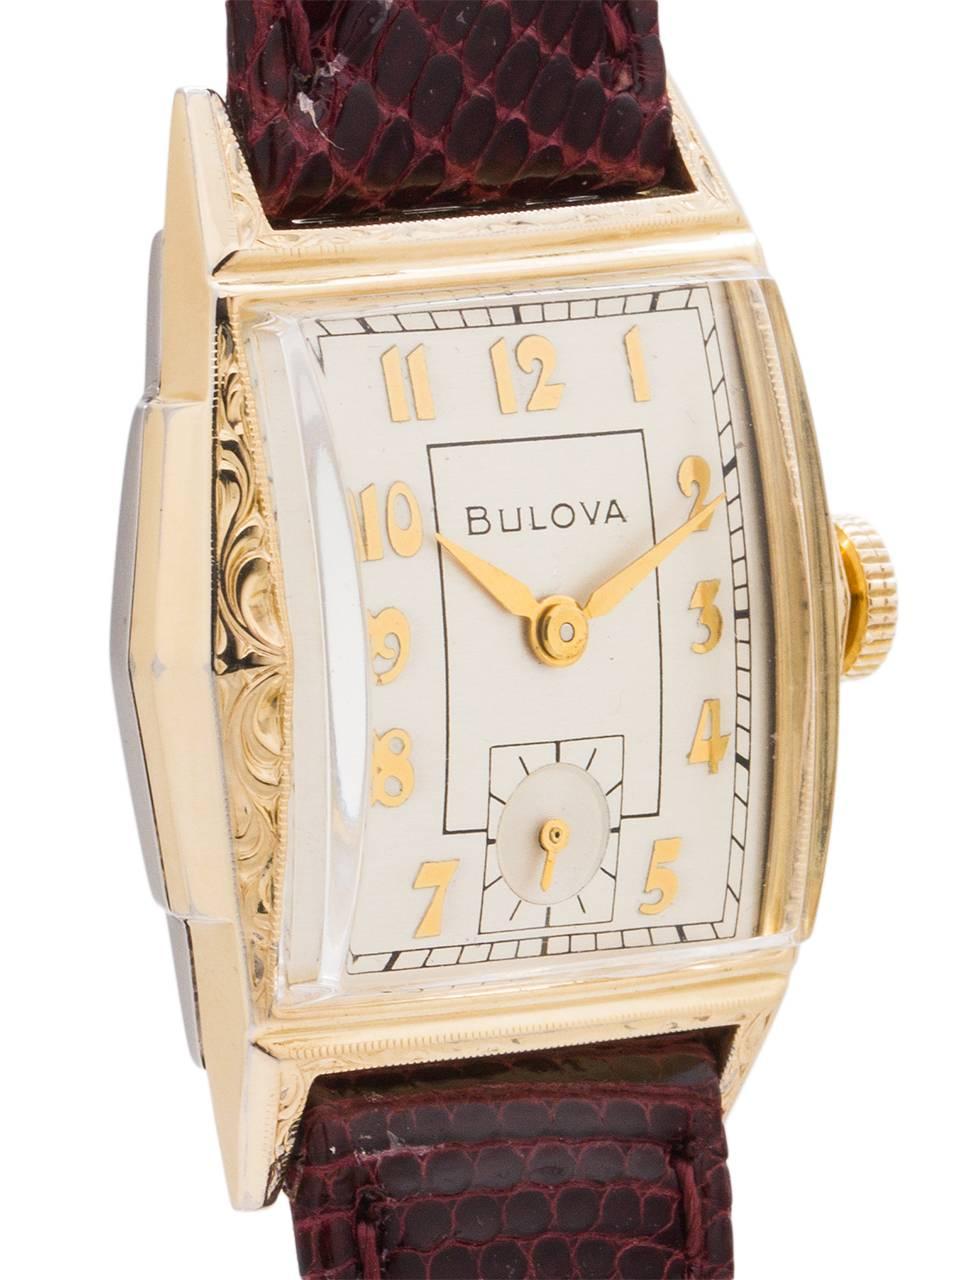 
Vintage man’s medium size Bulova YGF manual wind dress model circa 1951. Featuring a 25 X 35mm tonneau shaped case with decorative engraved bezel and lugs, domed acrylic crystal, and pleasing original matte silvered dial with gold raised indexes